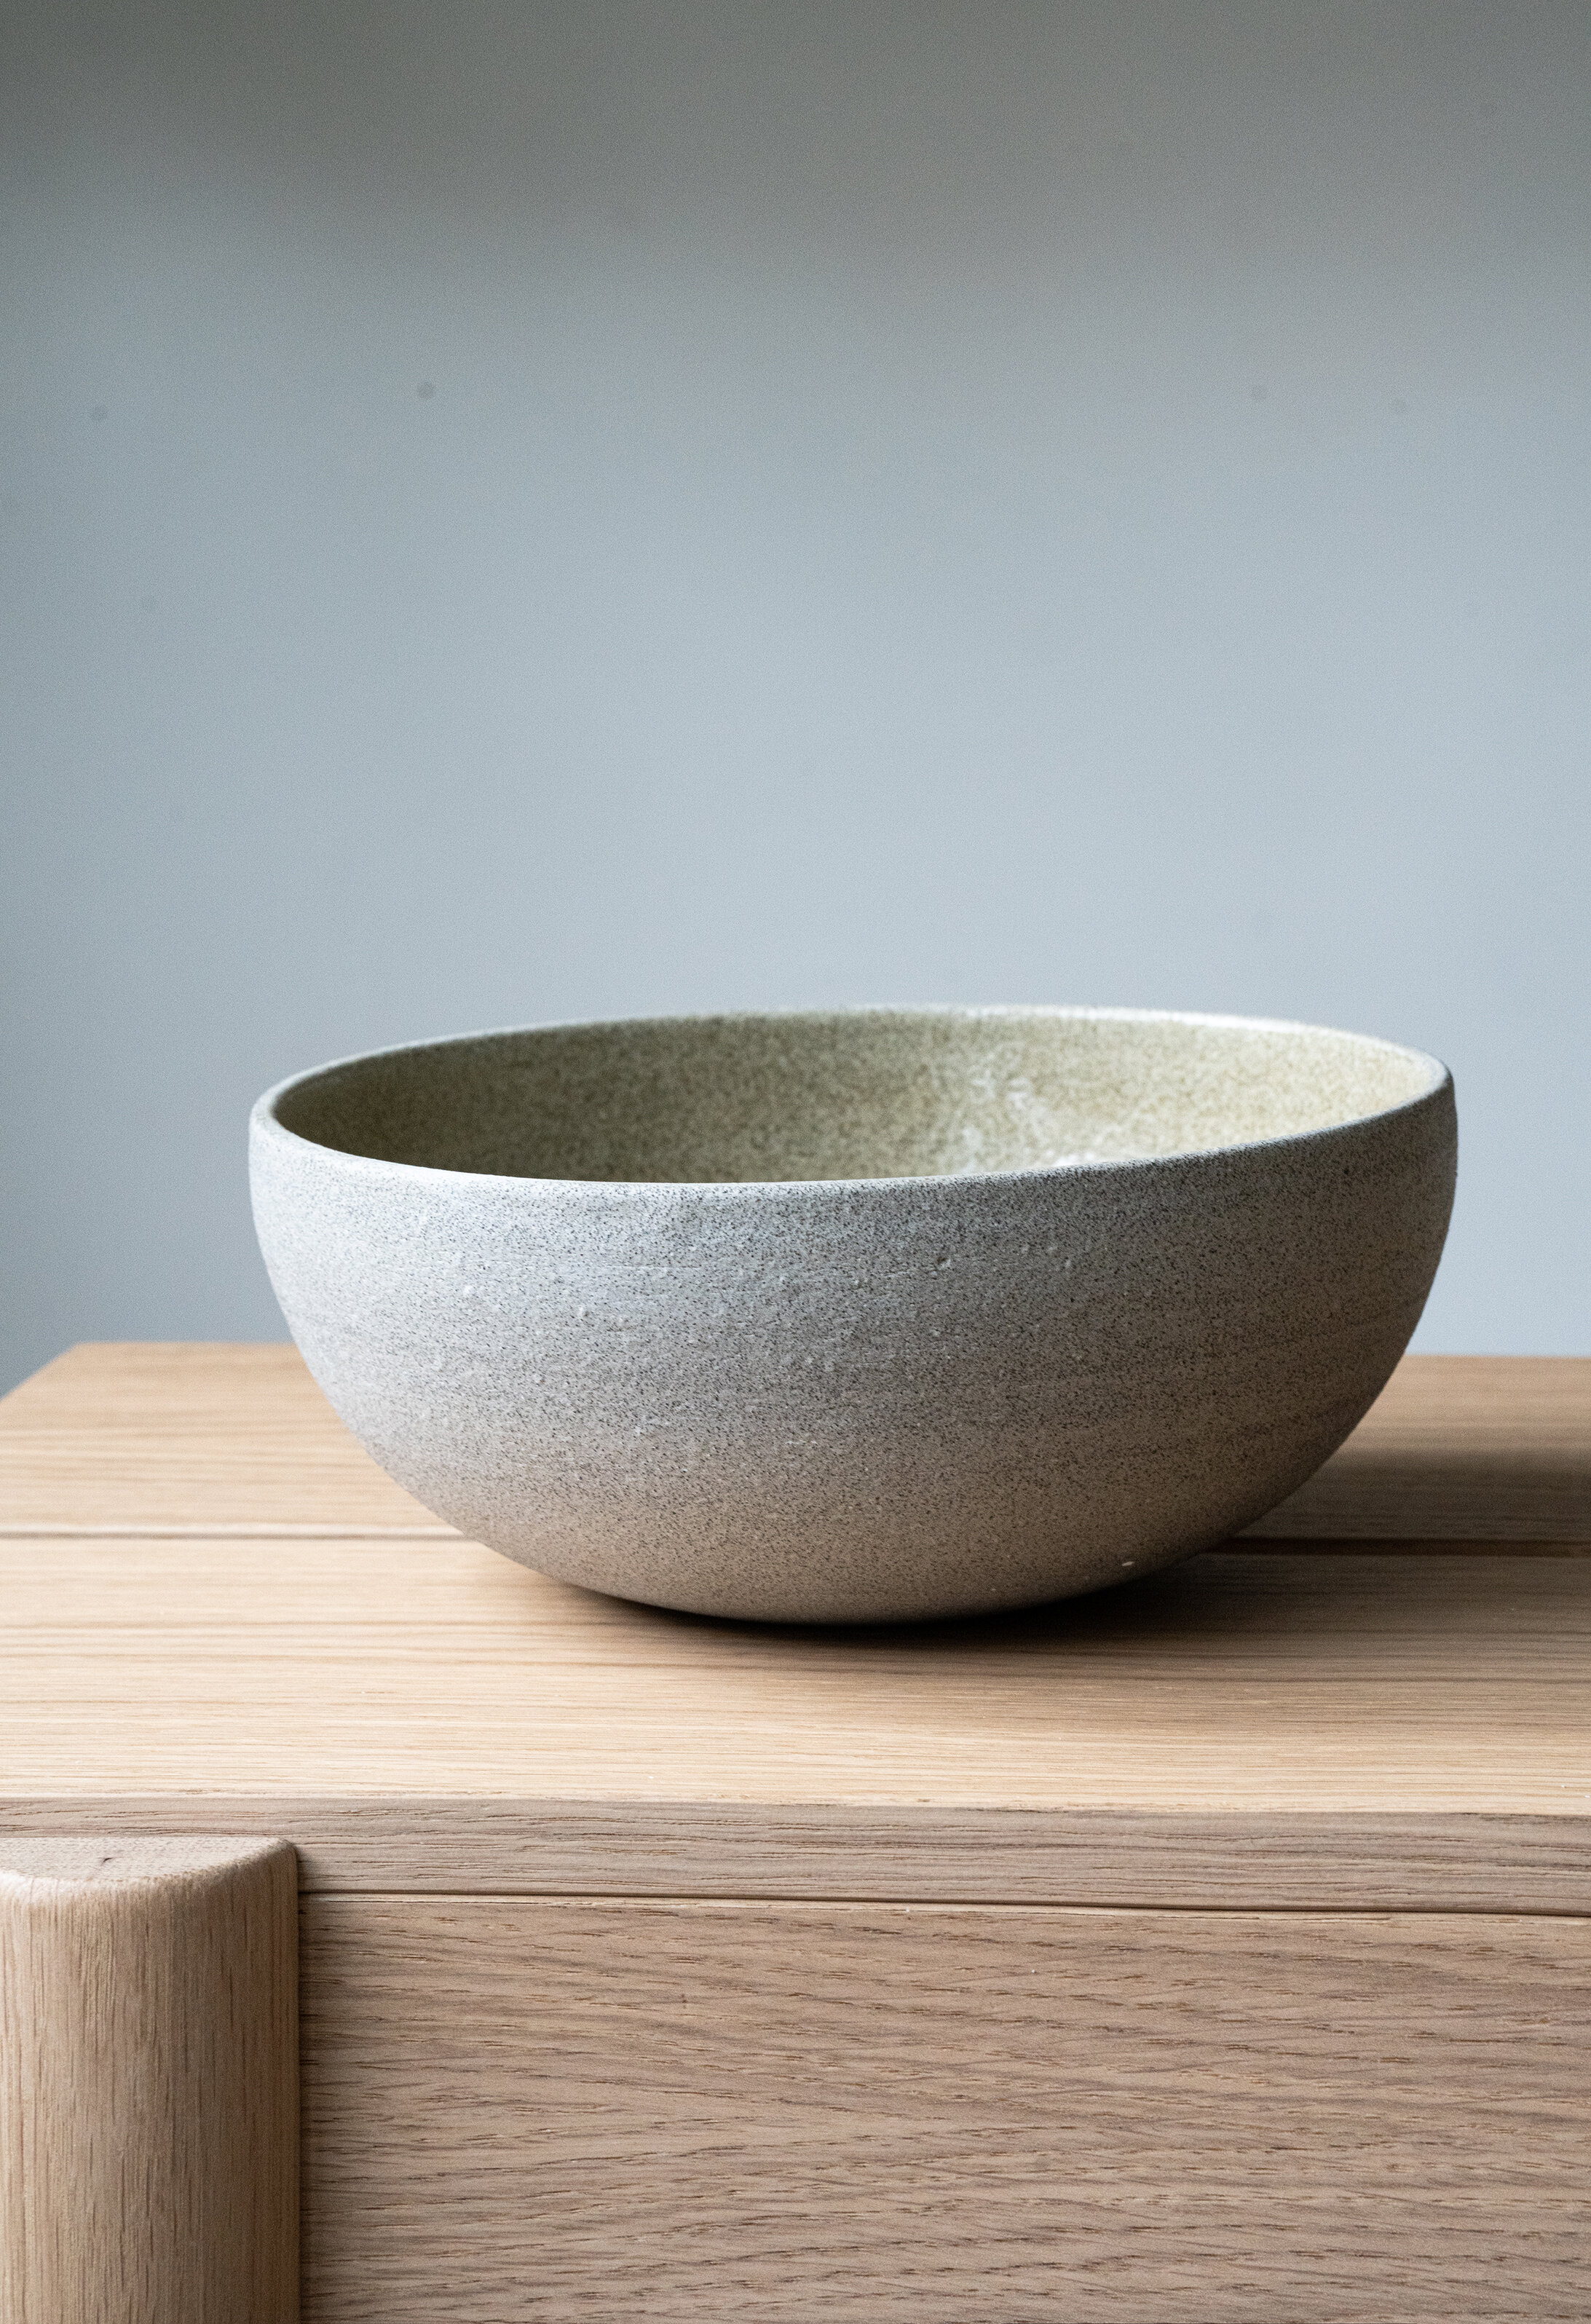 Handcrafted Stoneware Mixing Bowls